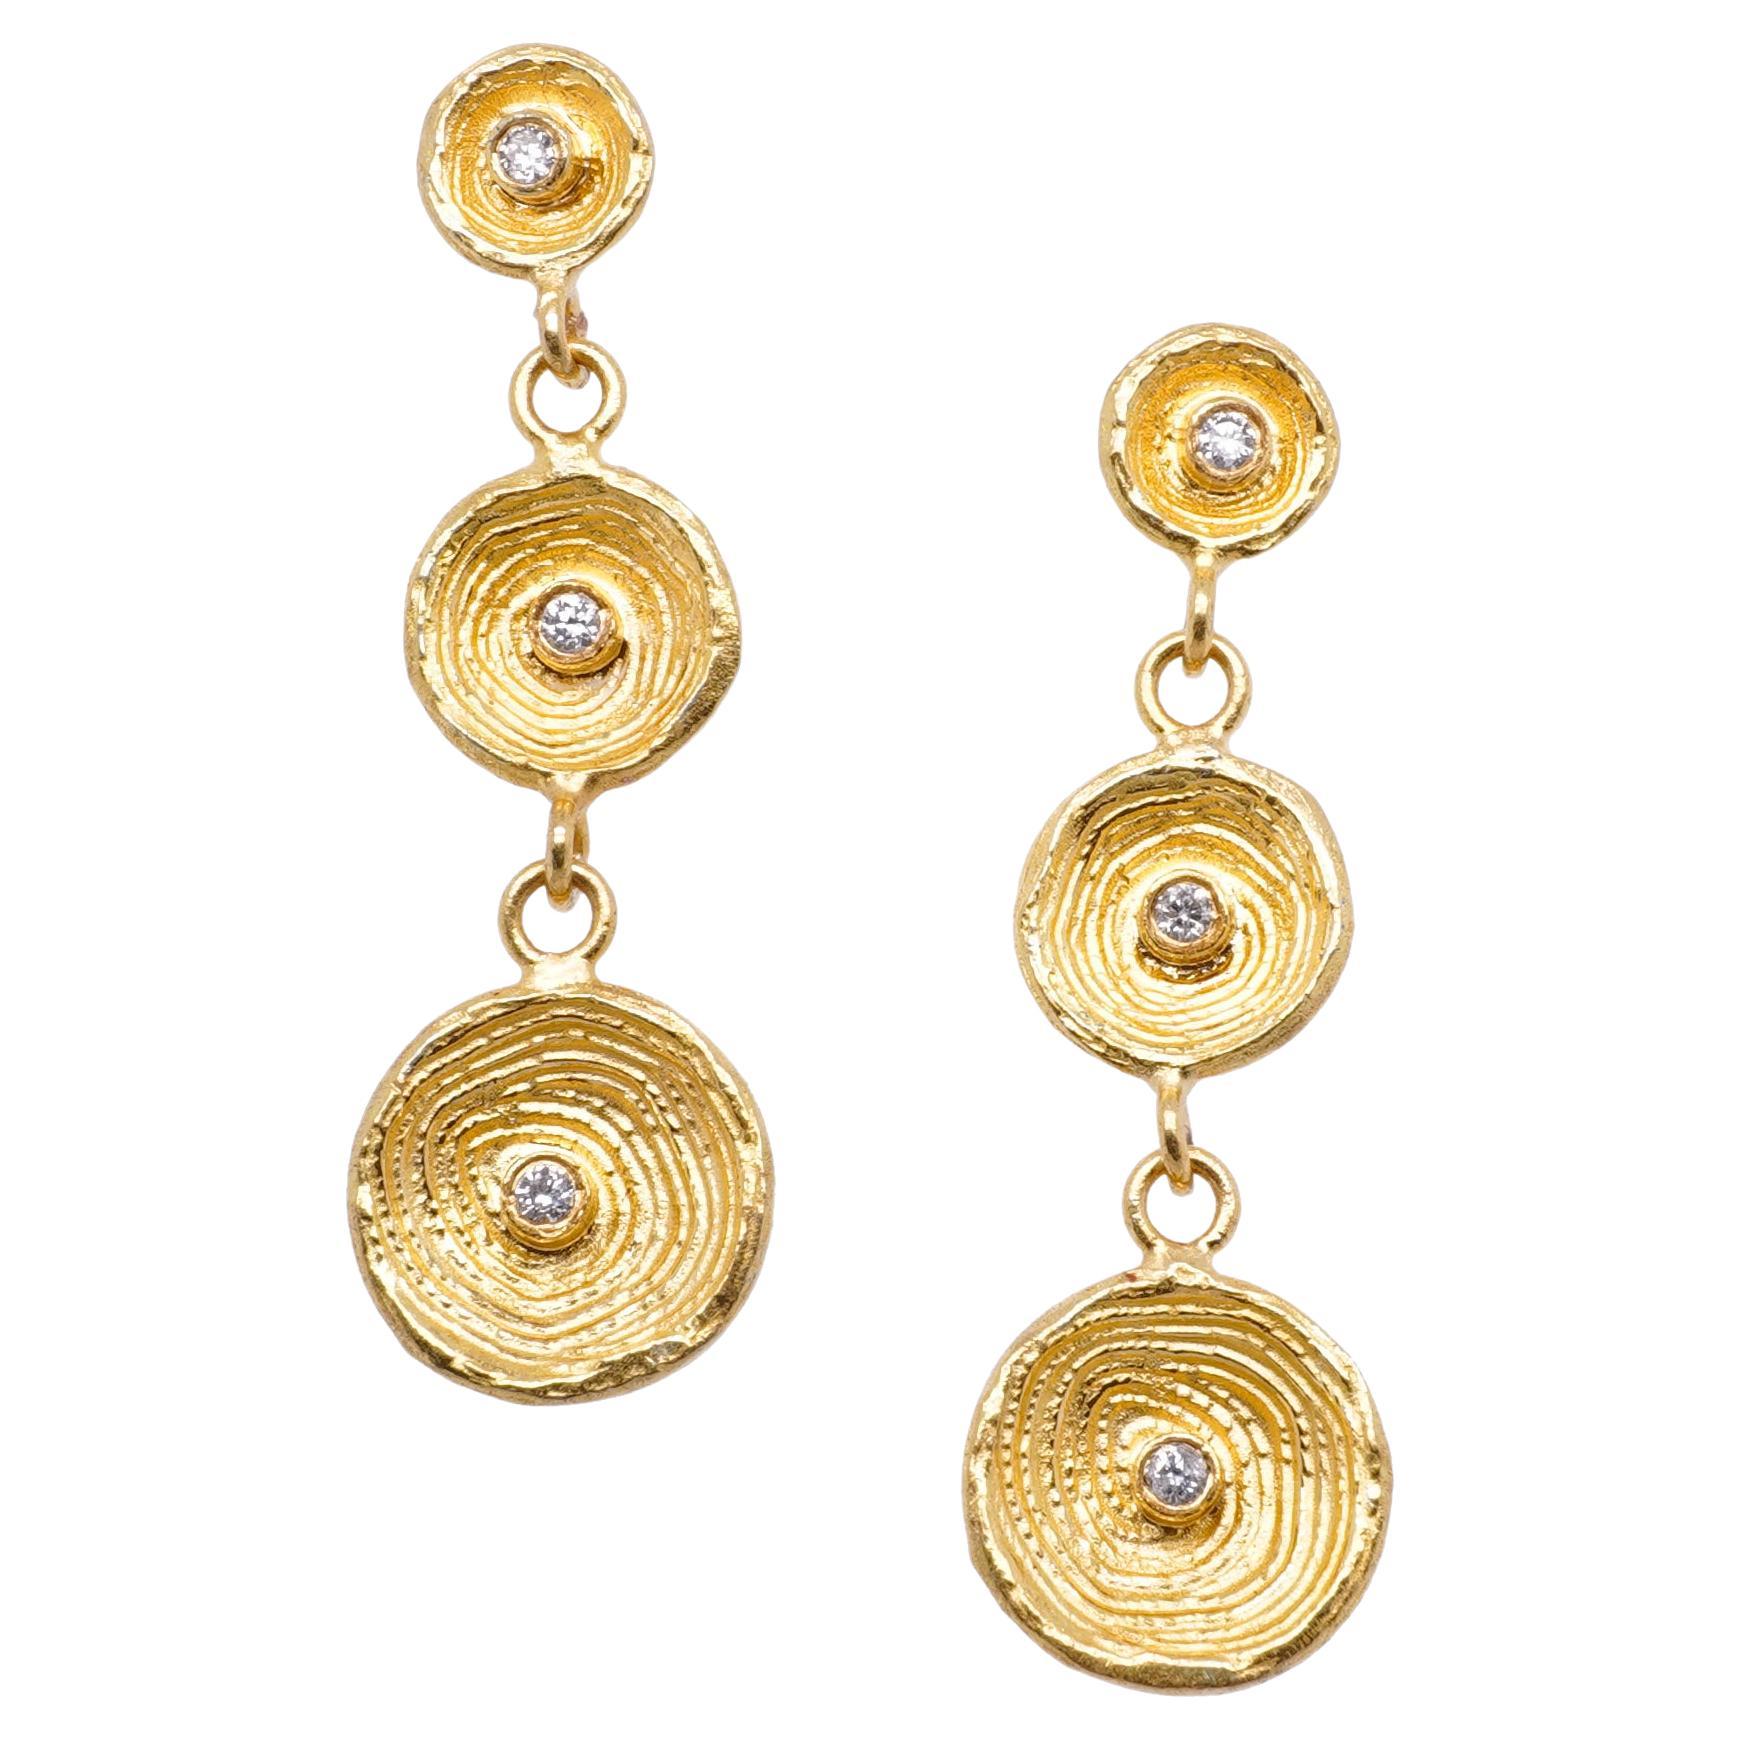 Circle of Life, Disc, Cup Triple Dangle Earrings with Diamond Detail, 24kt Gold by Prehistoric Works of Istanbul, Turkey. Total length: 29mm (1.1